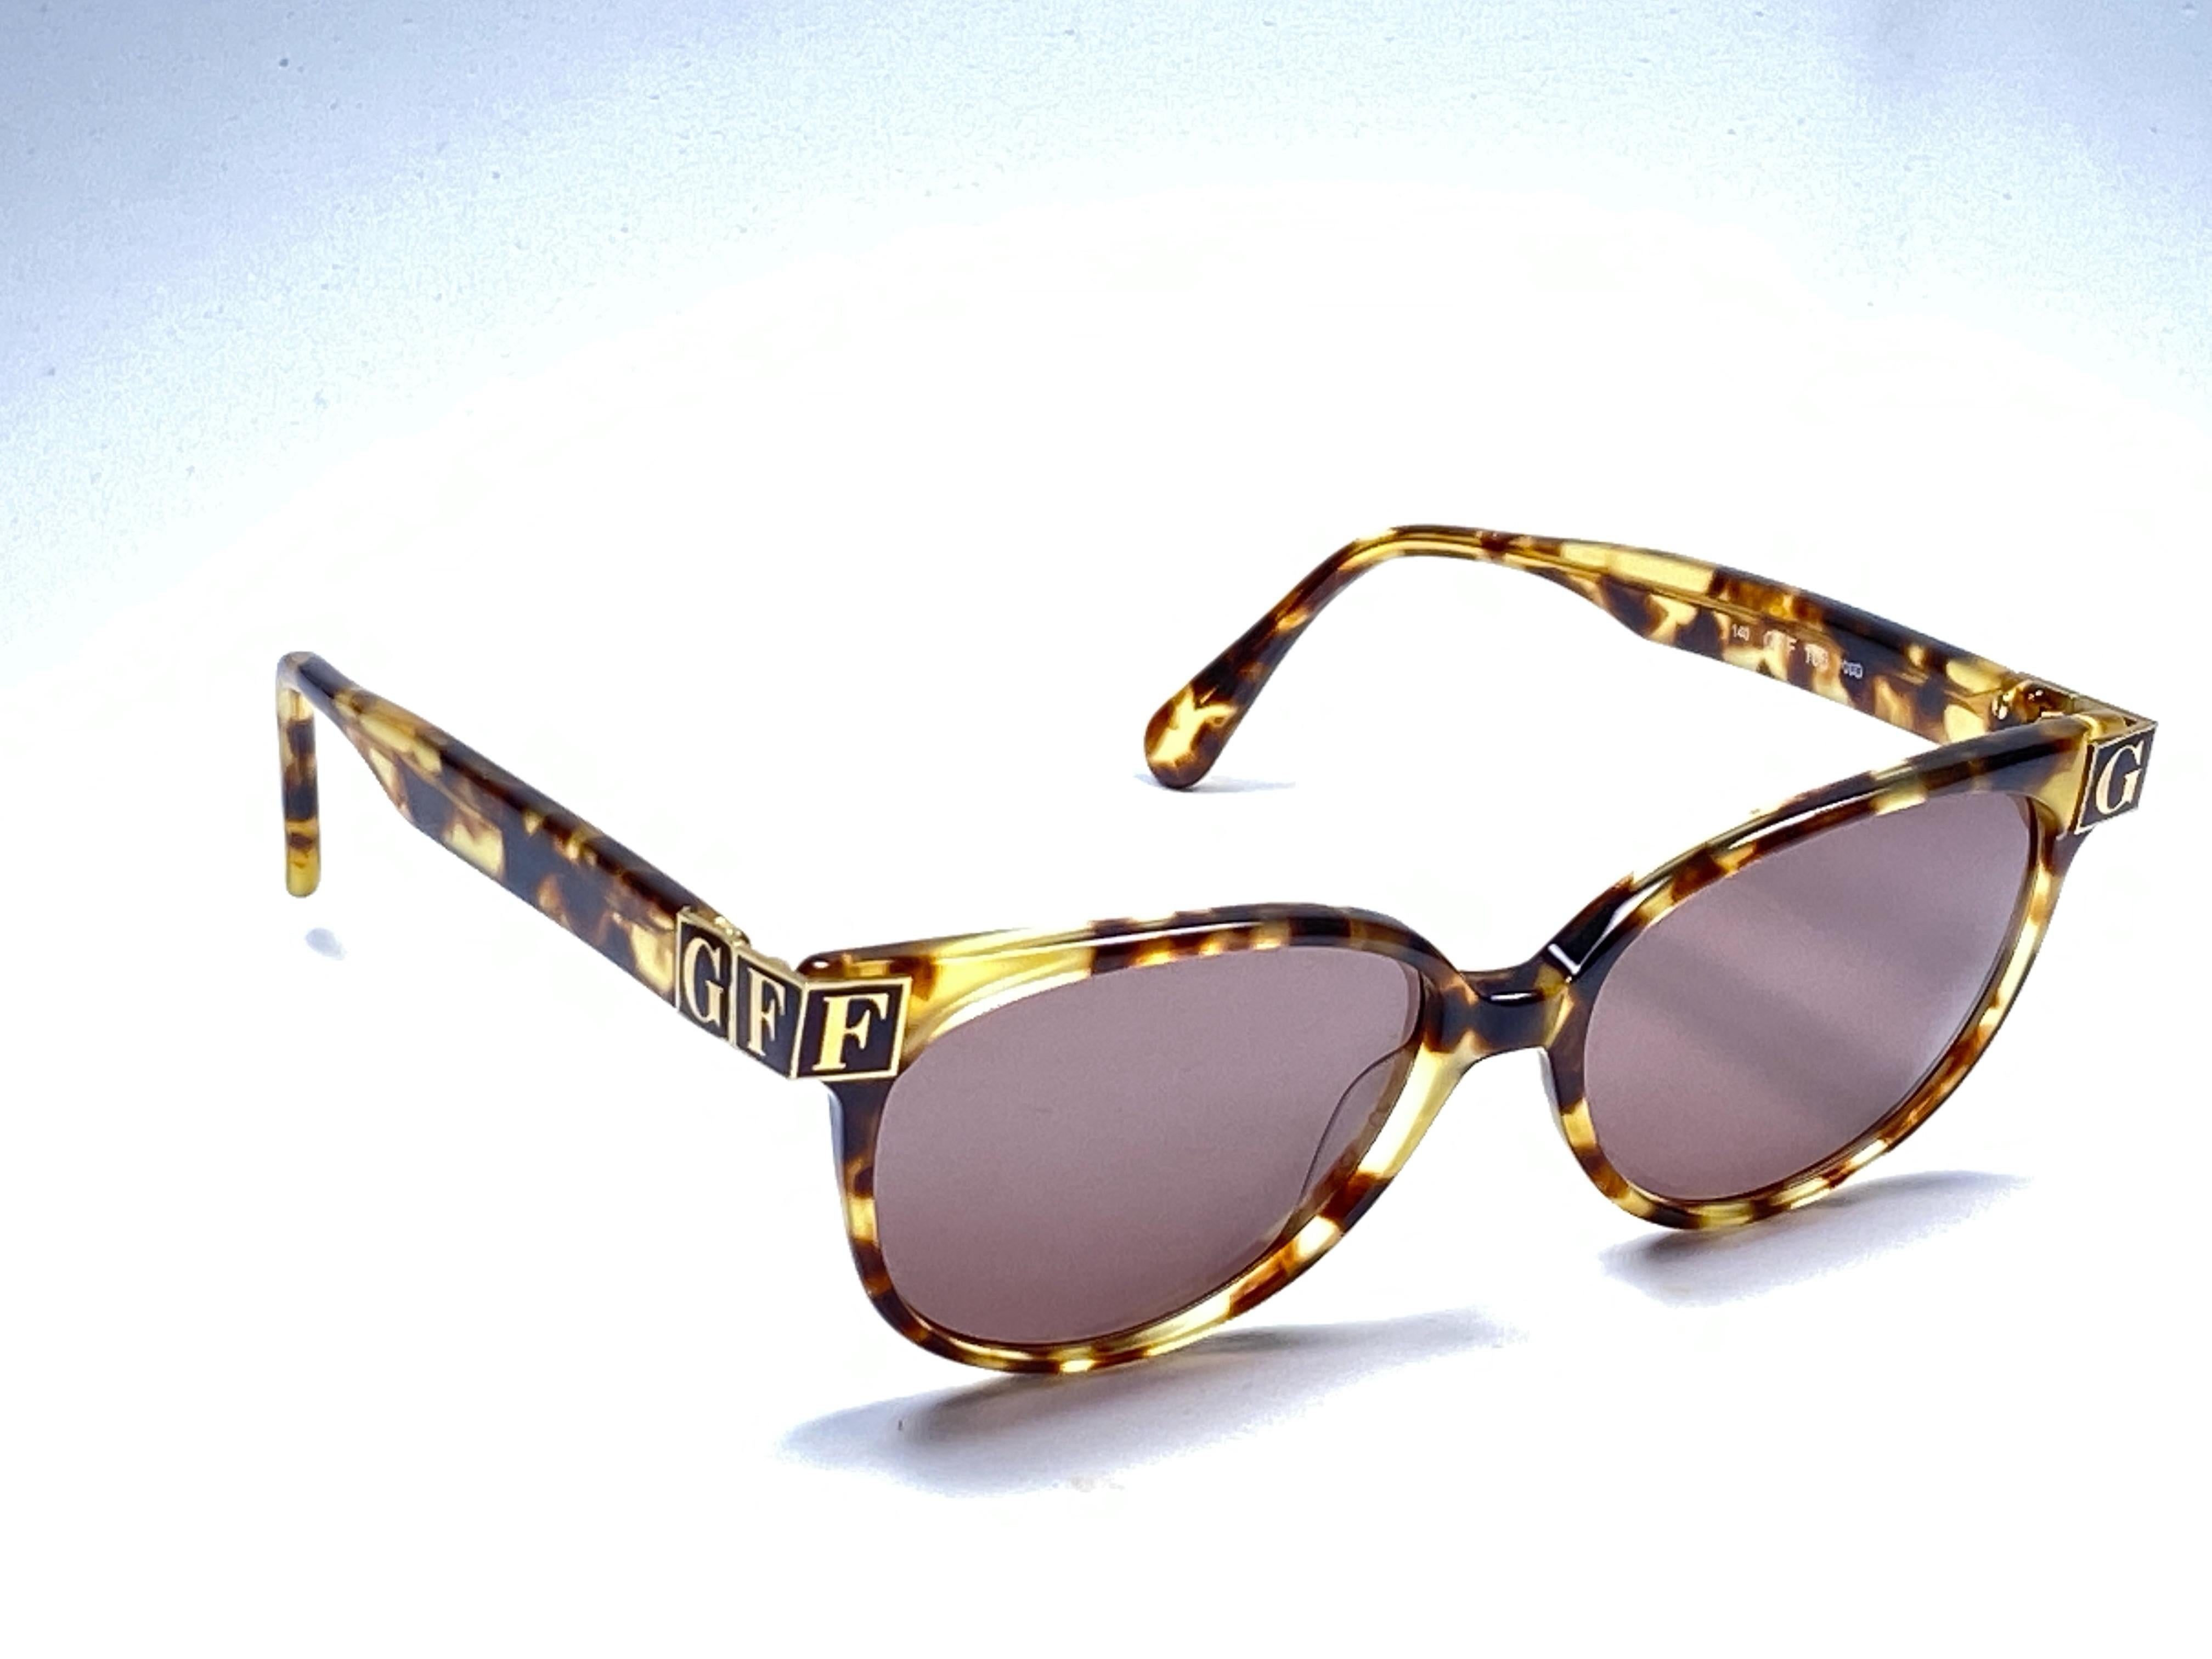 New vintage Gianfranco Ferre sunglasses.    

Gold and tortoise details frame holding a pair of spotless grey lenses.   

New, never worn or displayed. 

 Made in Italy.

MEASUREMENTS 



FRONT : 14 CMS

LENS HEIGHT : 4 CMS

LENS WIDTH : 5 CMS
